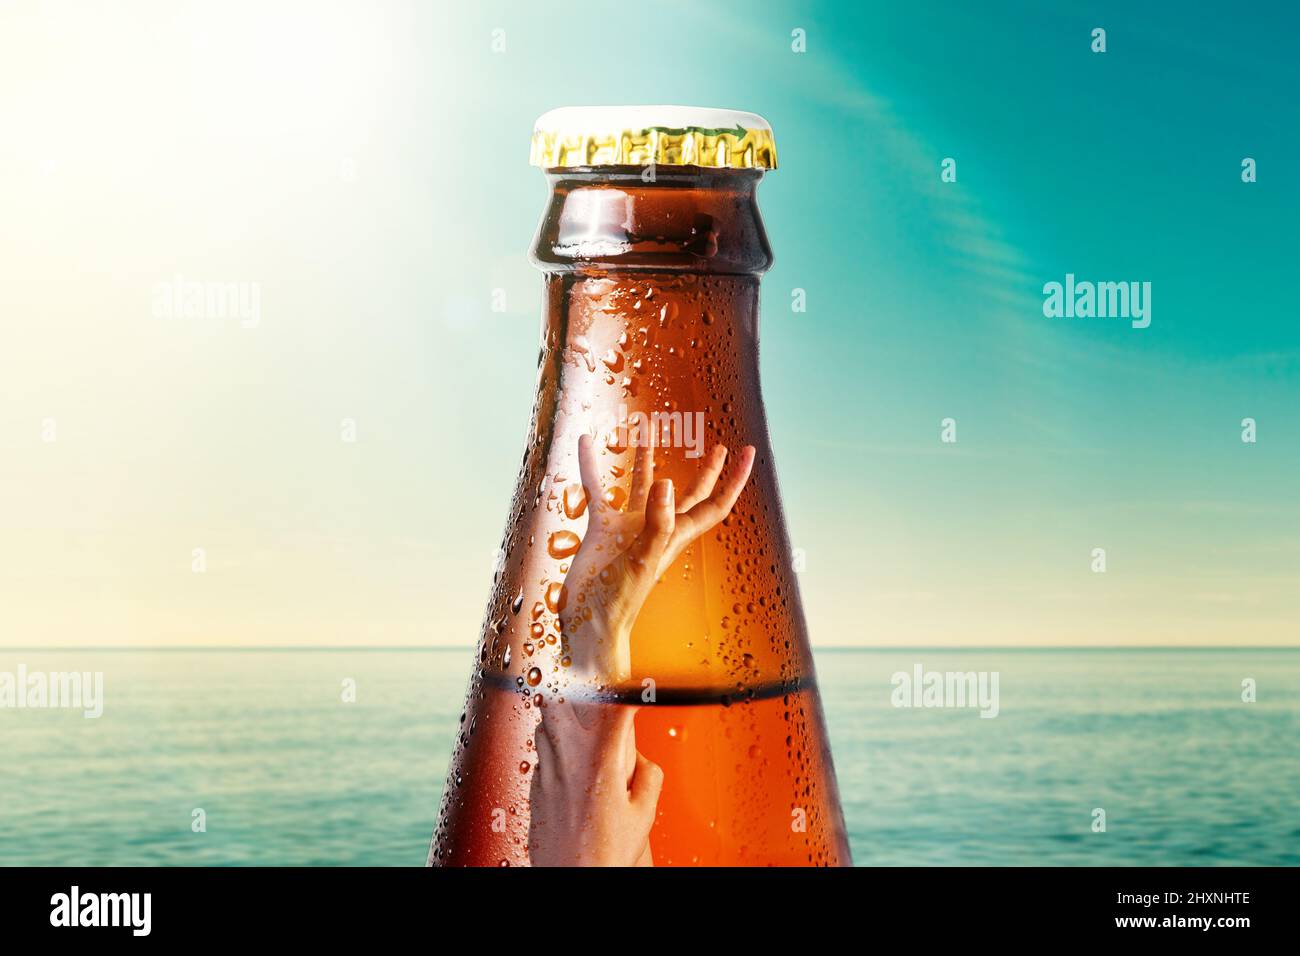 Close-up of the neck of wet glass bottle of dark beer against the background of the ocean and the sky. Inside it drowning hand. Alcoholic beverages on Stock Photo